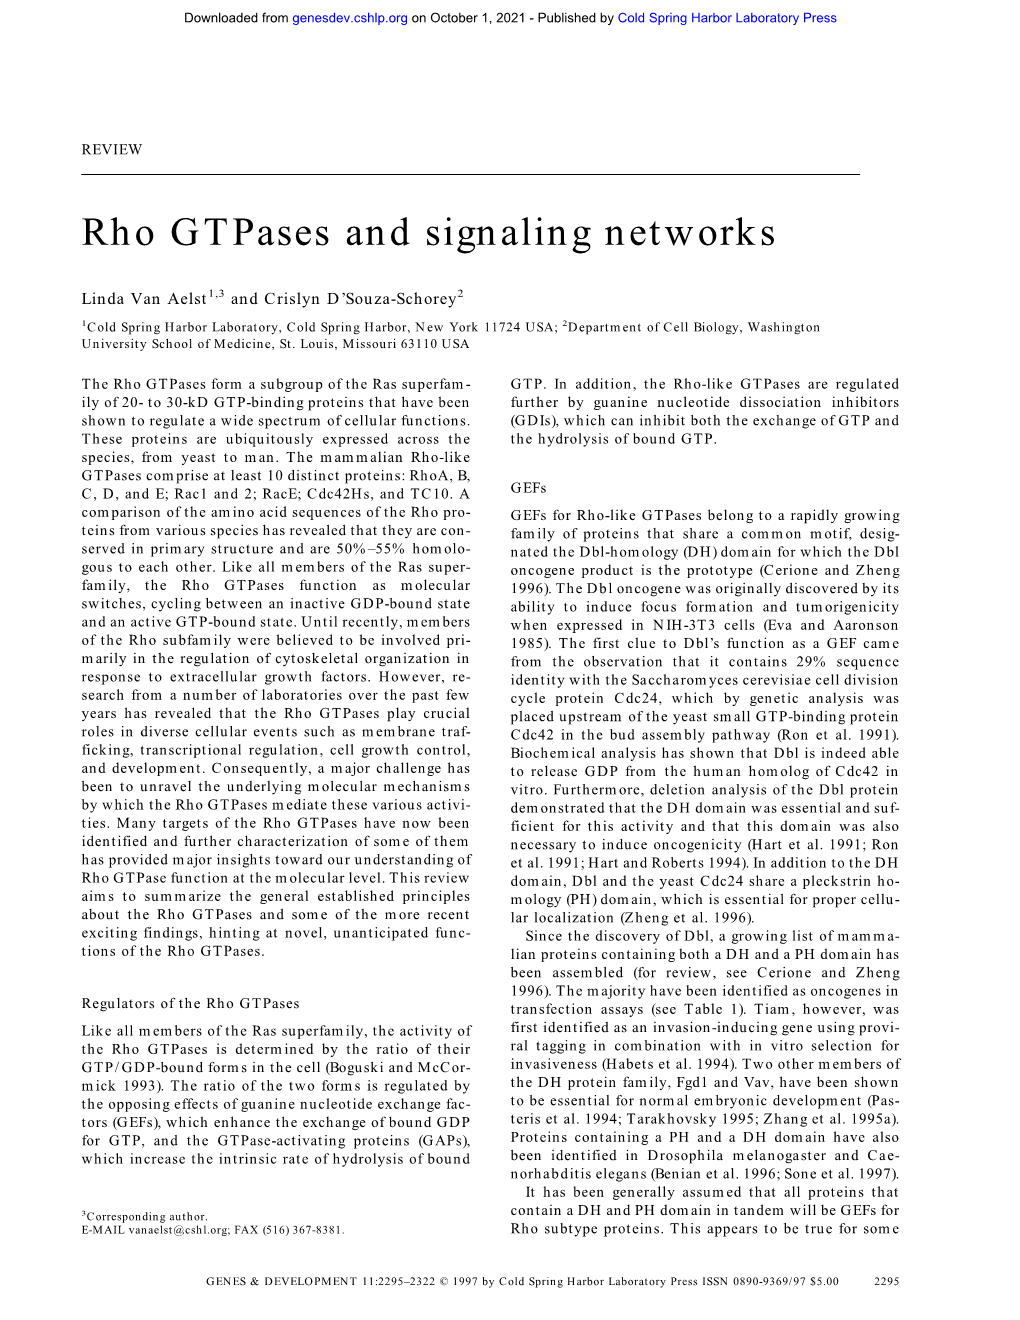 Rho Gtpases and Signaling Networks